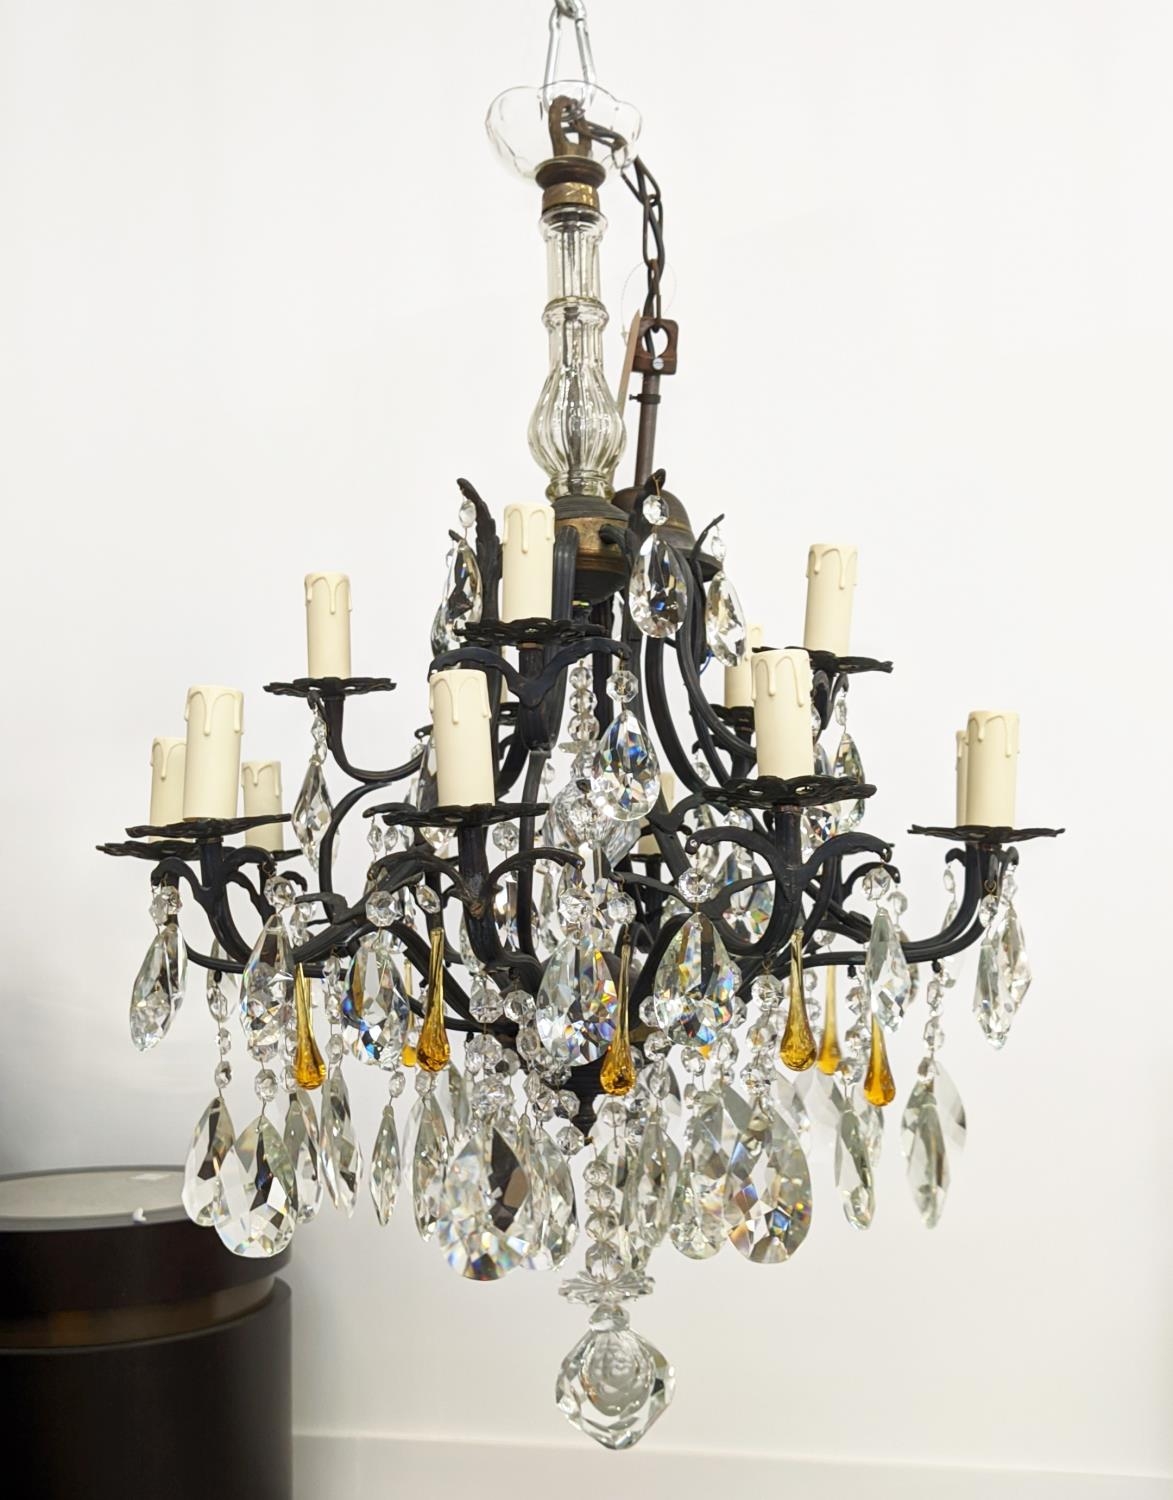 CHANDELIER, patinated metal with clear and amber glass drops from fifteen lights, 60cm W x 114cm - Image 5 of 18